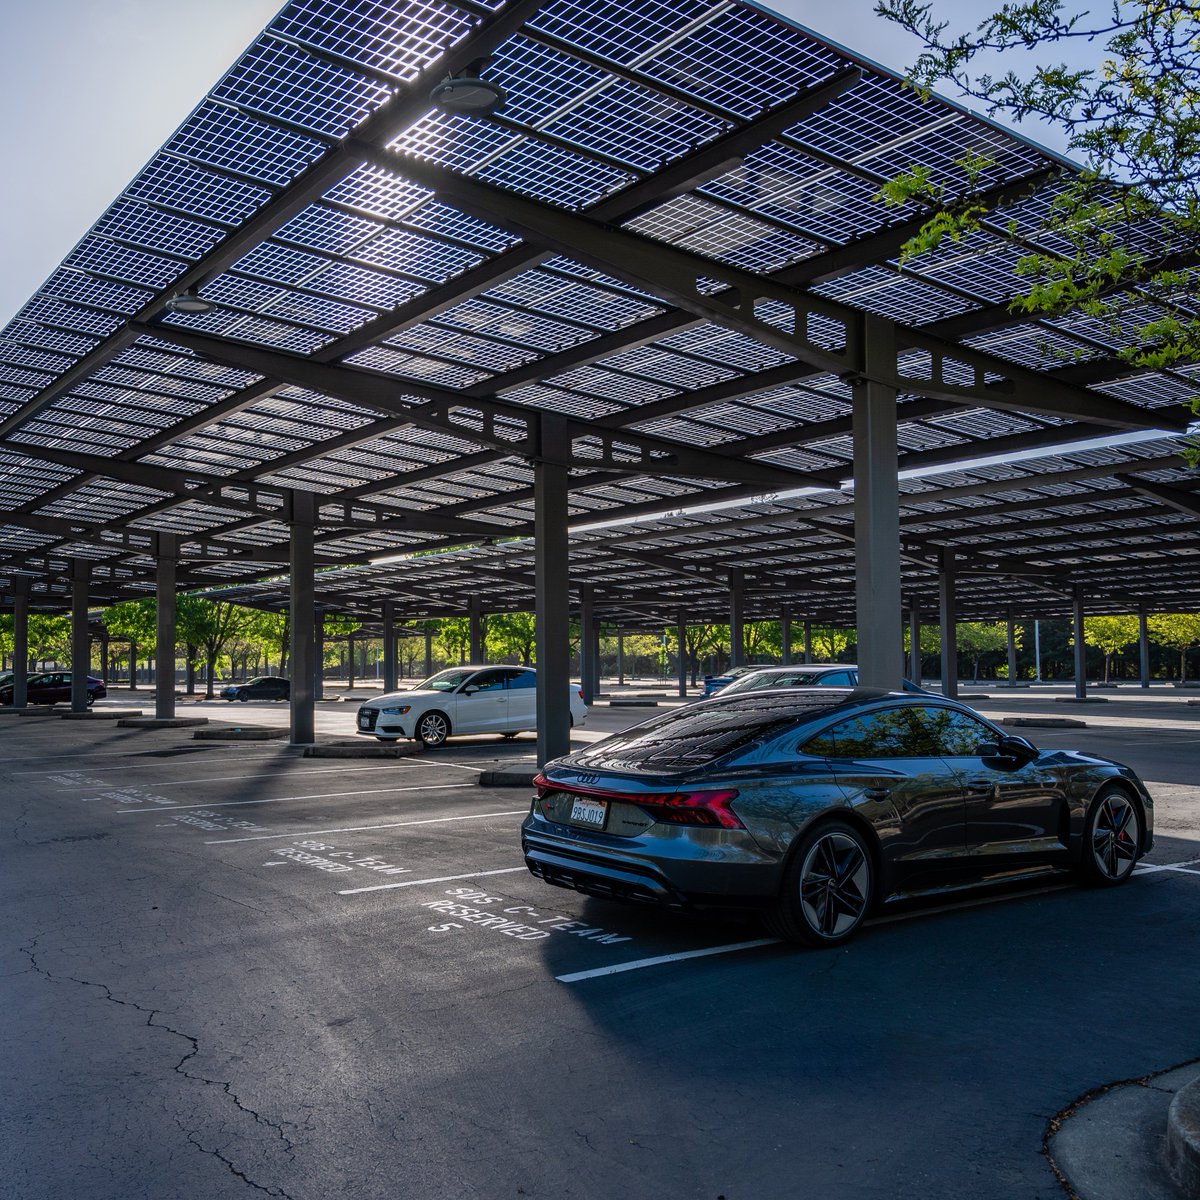 At @DSDrenewables' project for @bishopranch, the latest technology was on display. The #solar canopy uses “bifacial” 405W modules with a glass backsheet from @Qcells_NA for more production. Under it is an @Audi RS e-tron GT #ev with 637 hp and 0-60 in 3.1 seconds.